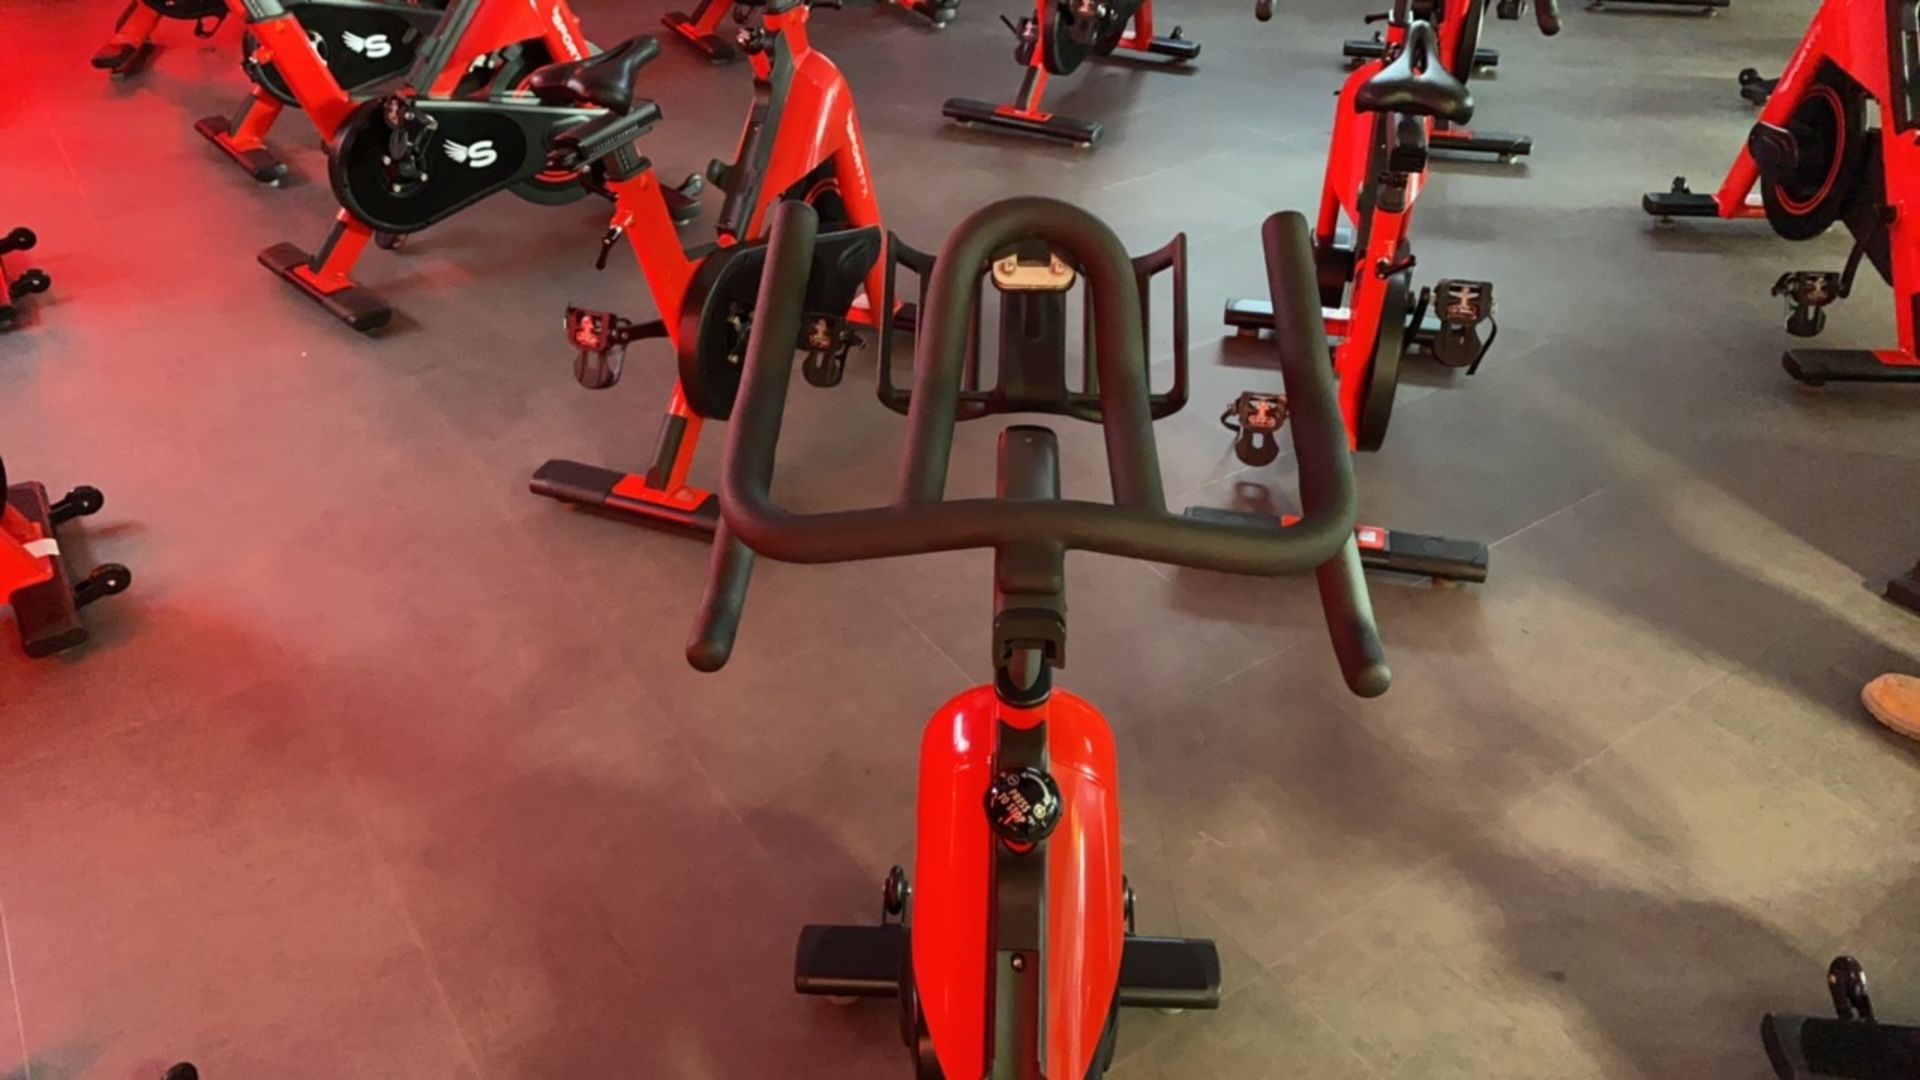 Sport FX Spin Bikes - Image 3 of 4